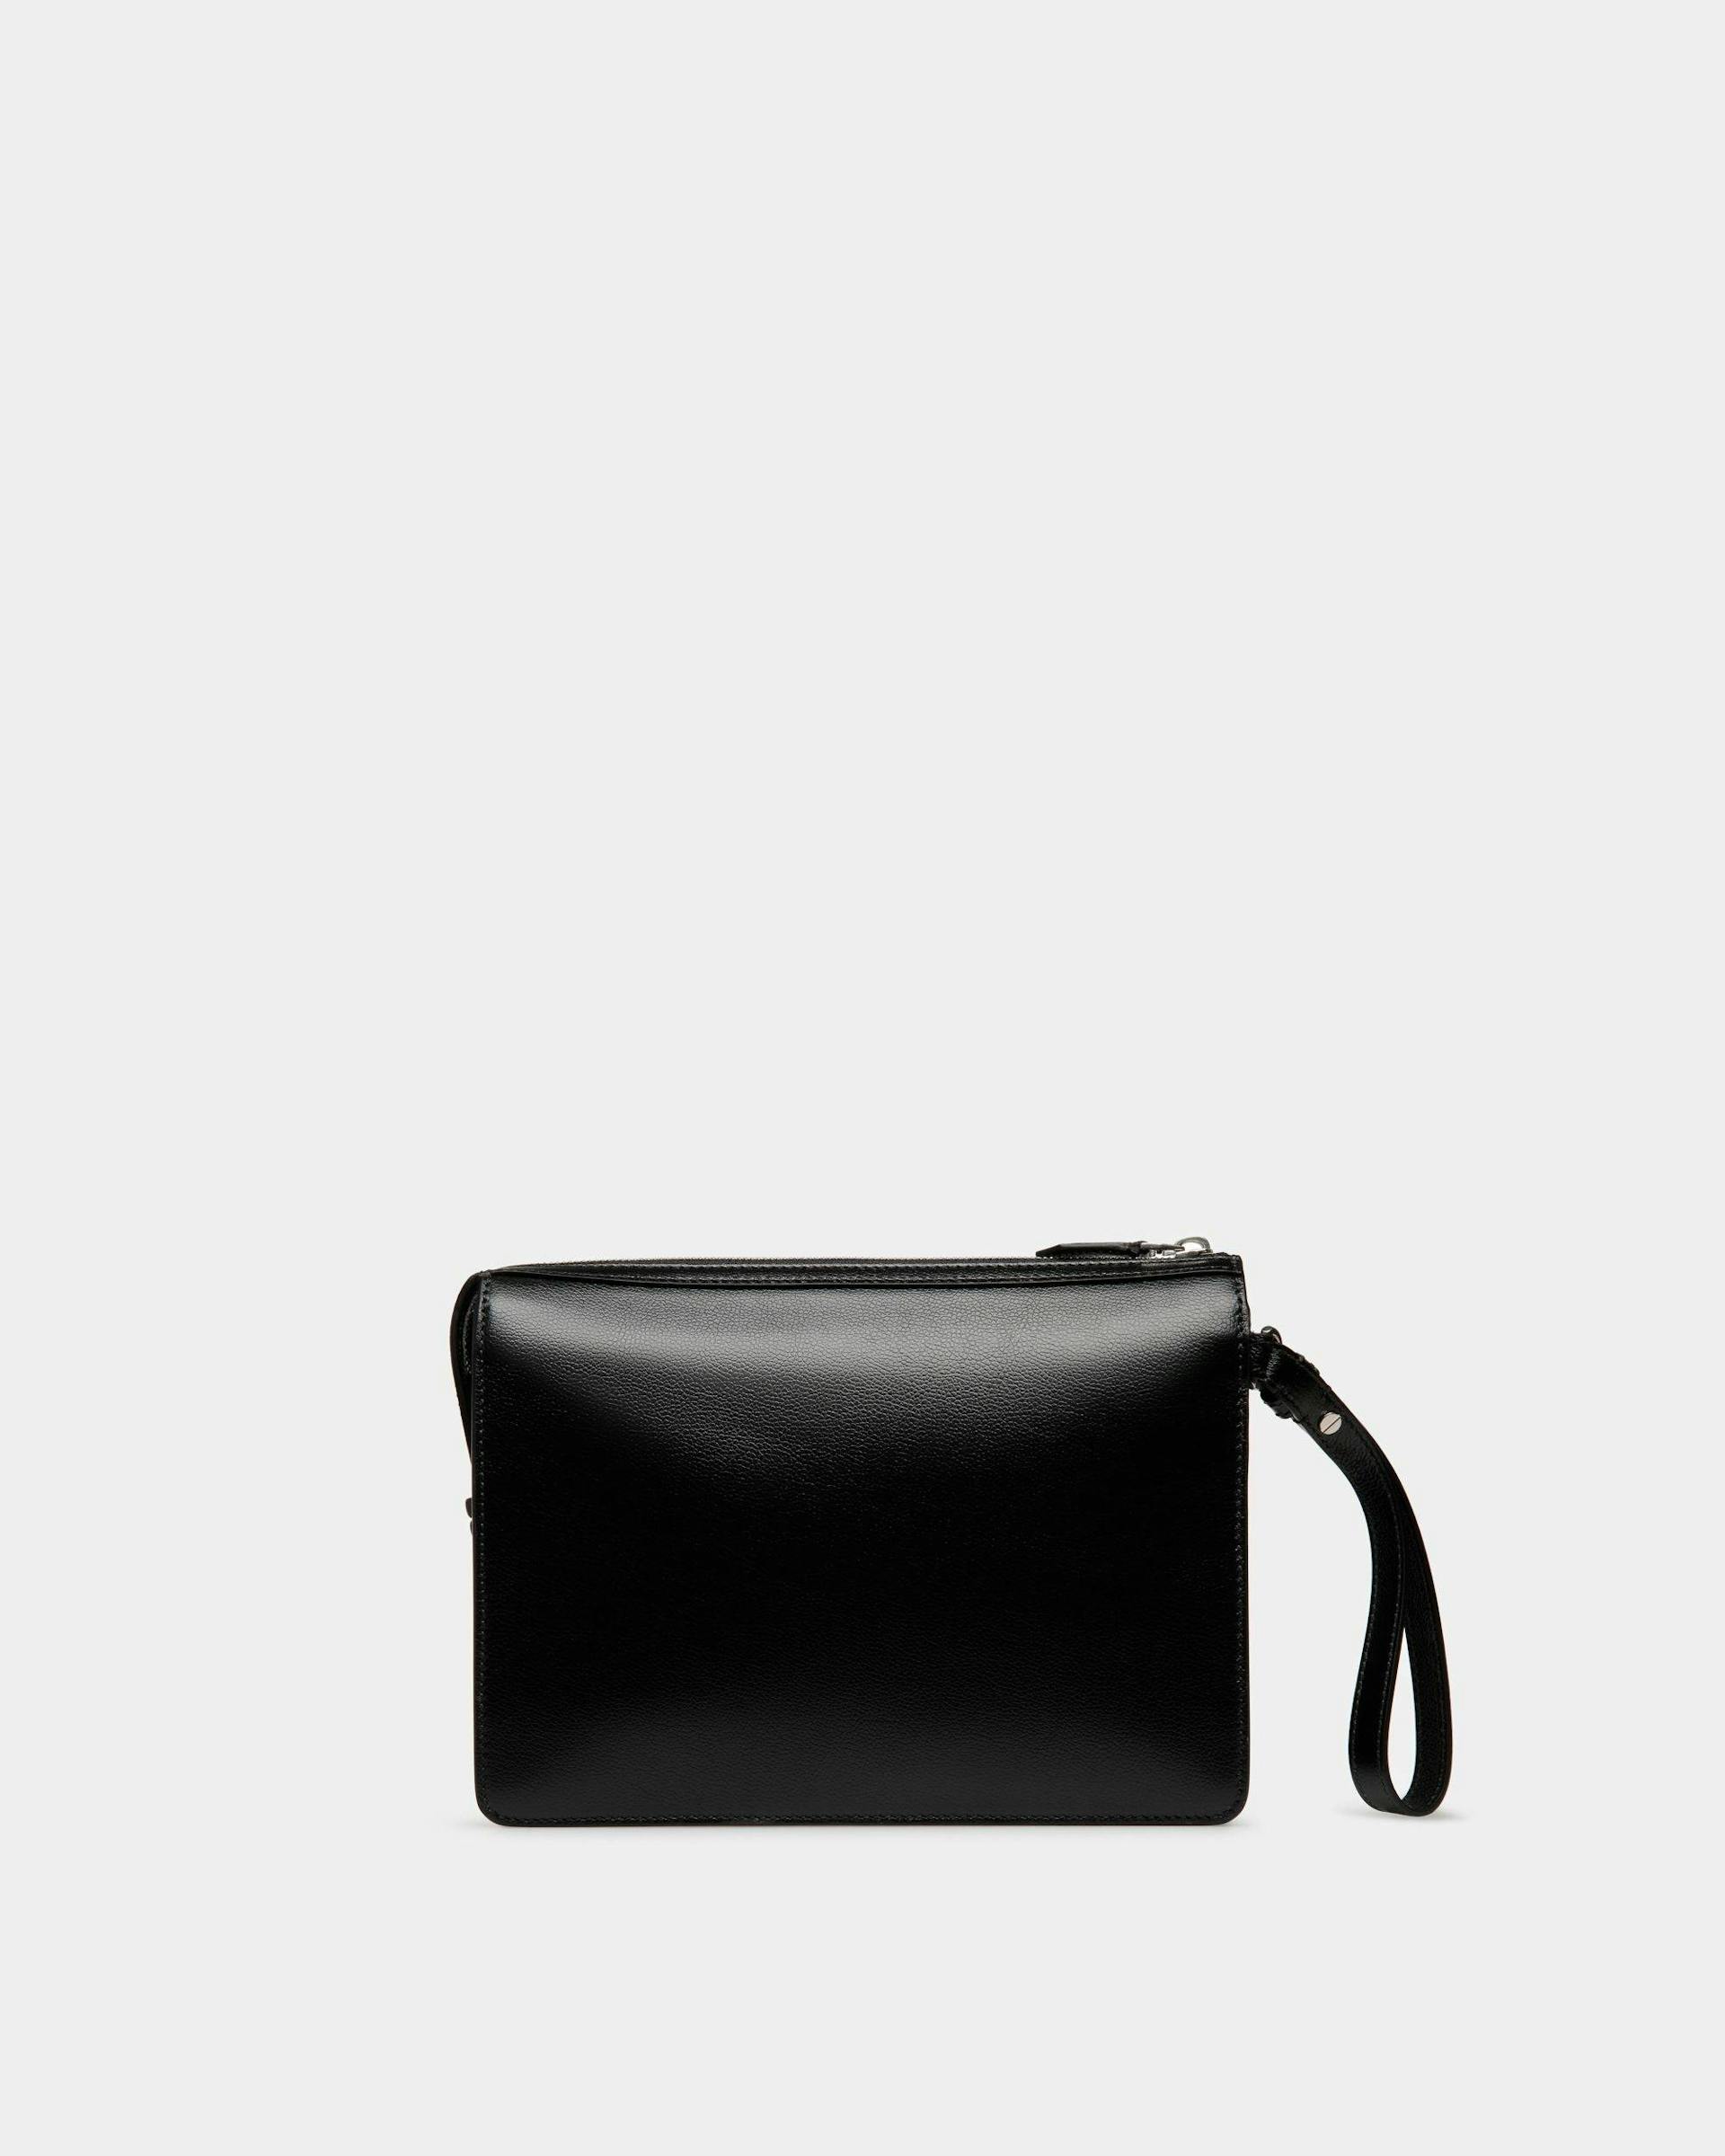 Men's Banque Clutch In Black Leather | Bally | Still Life Back